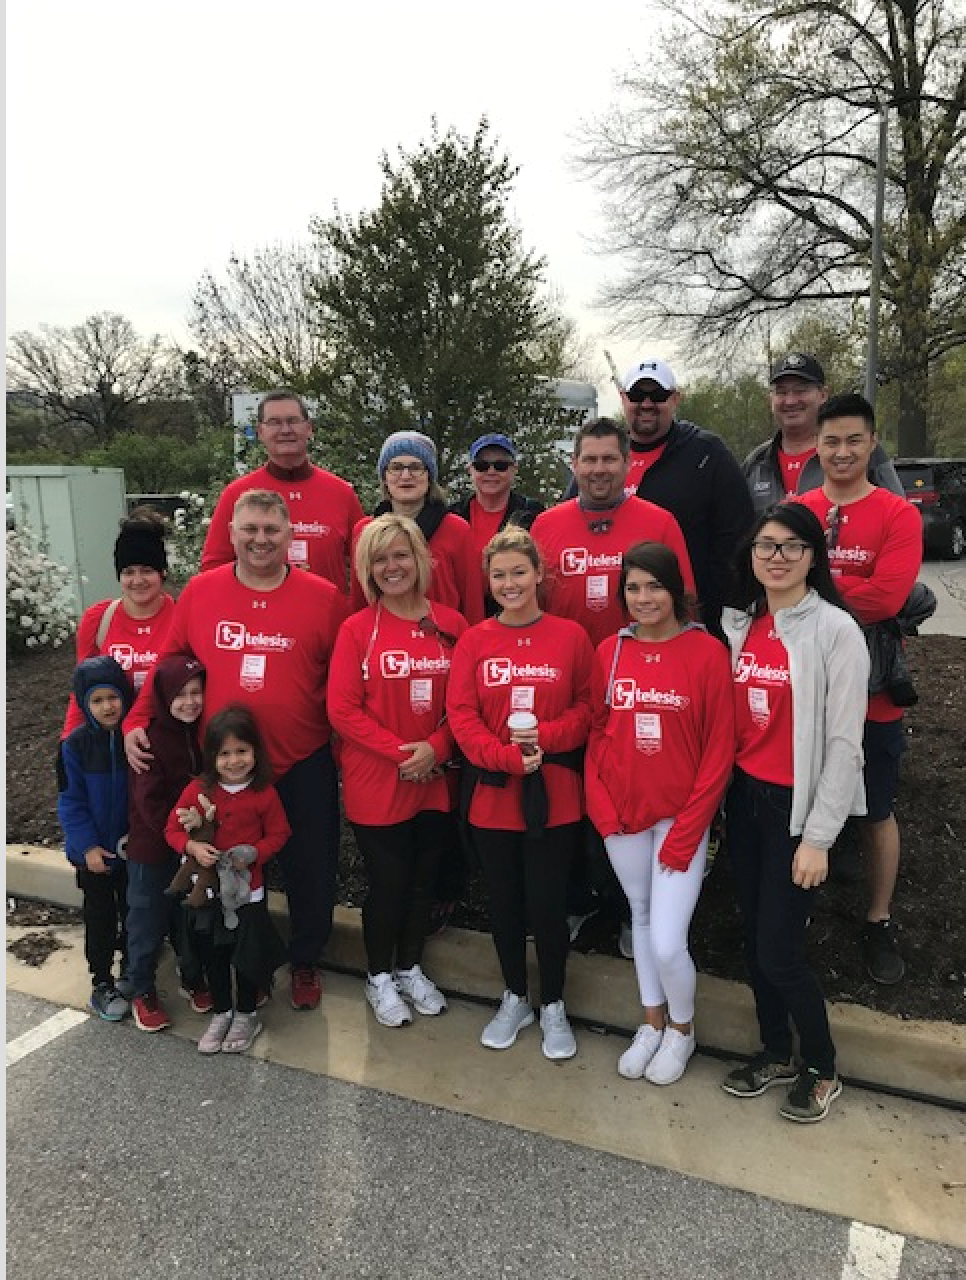 Telesis7 supports Walk for Wishes to benefit Make-A-Wish